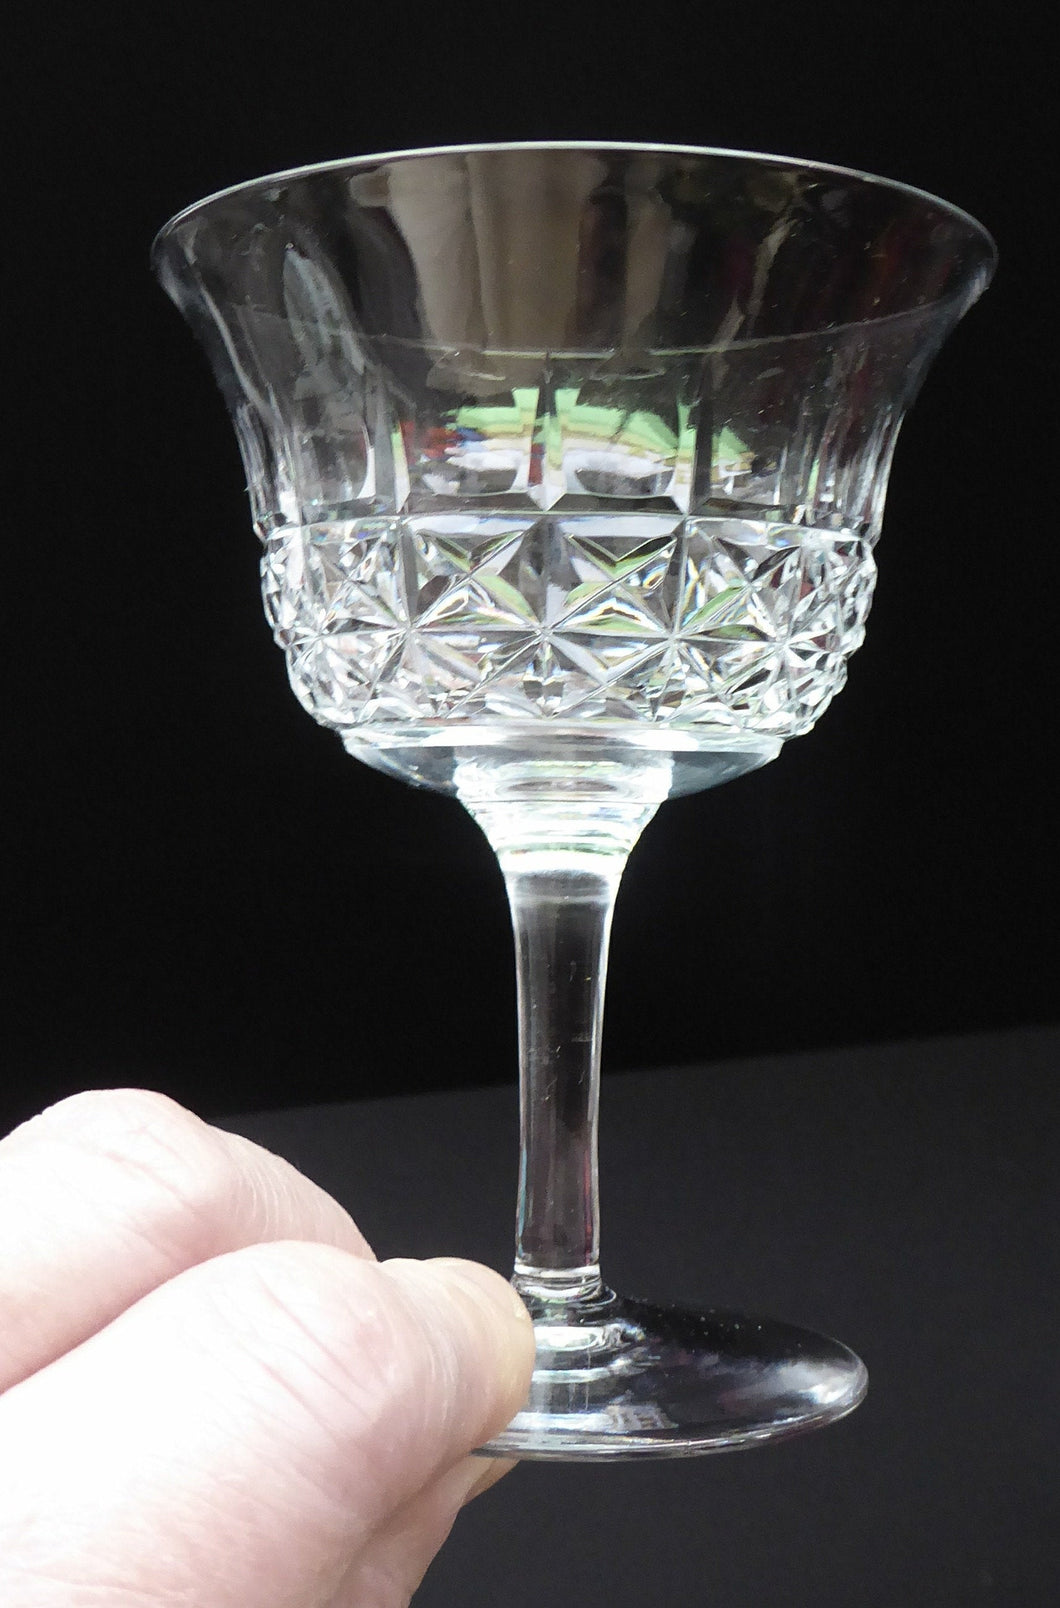 Vintage TUDOR Crystal Sherry or Liqueur Glass. SINGLE GLASS. 4 inches in height